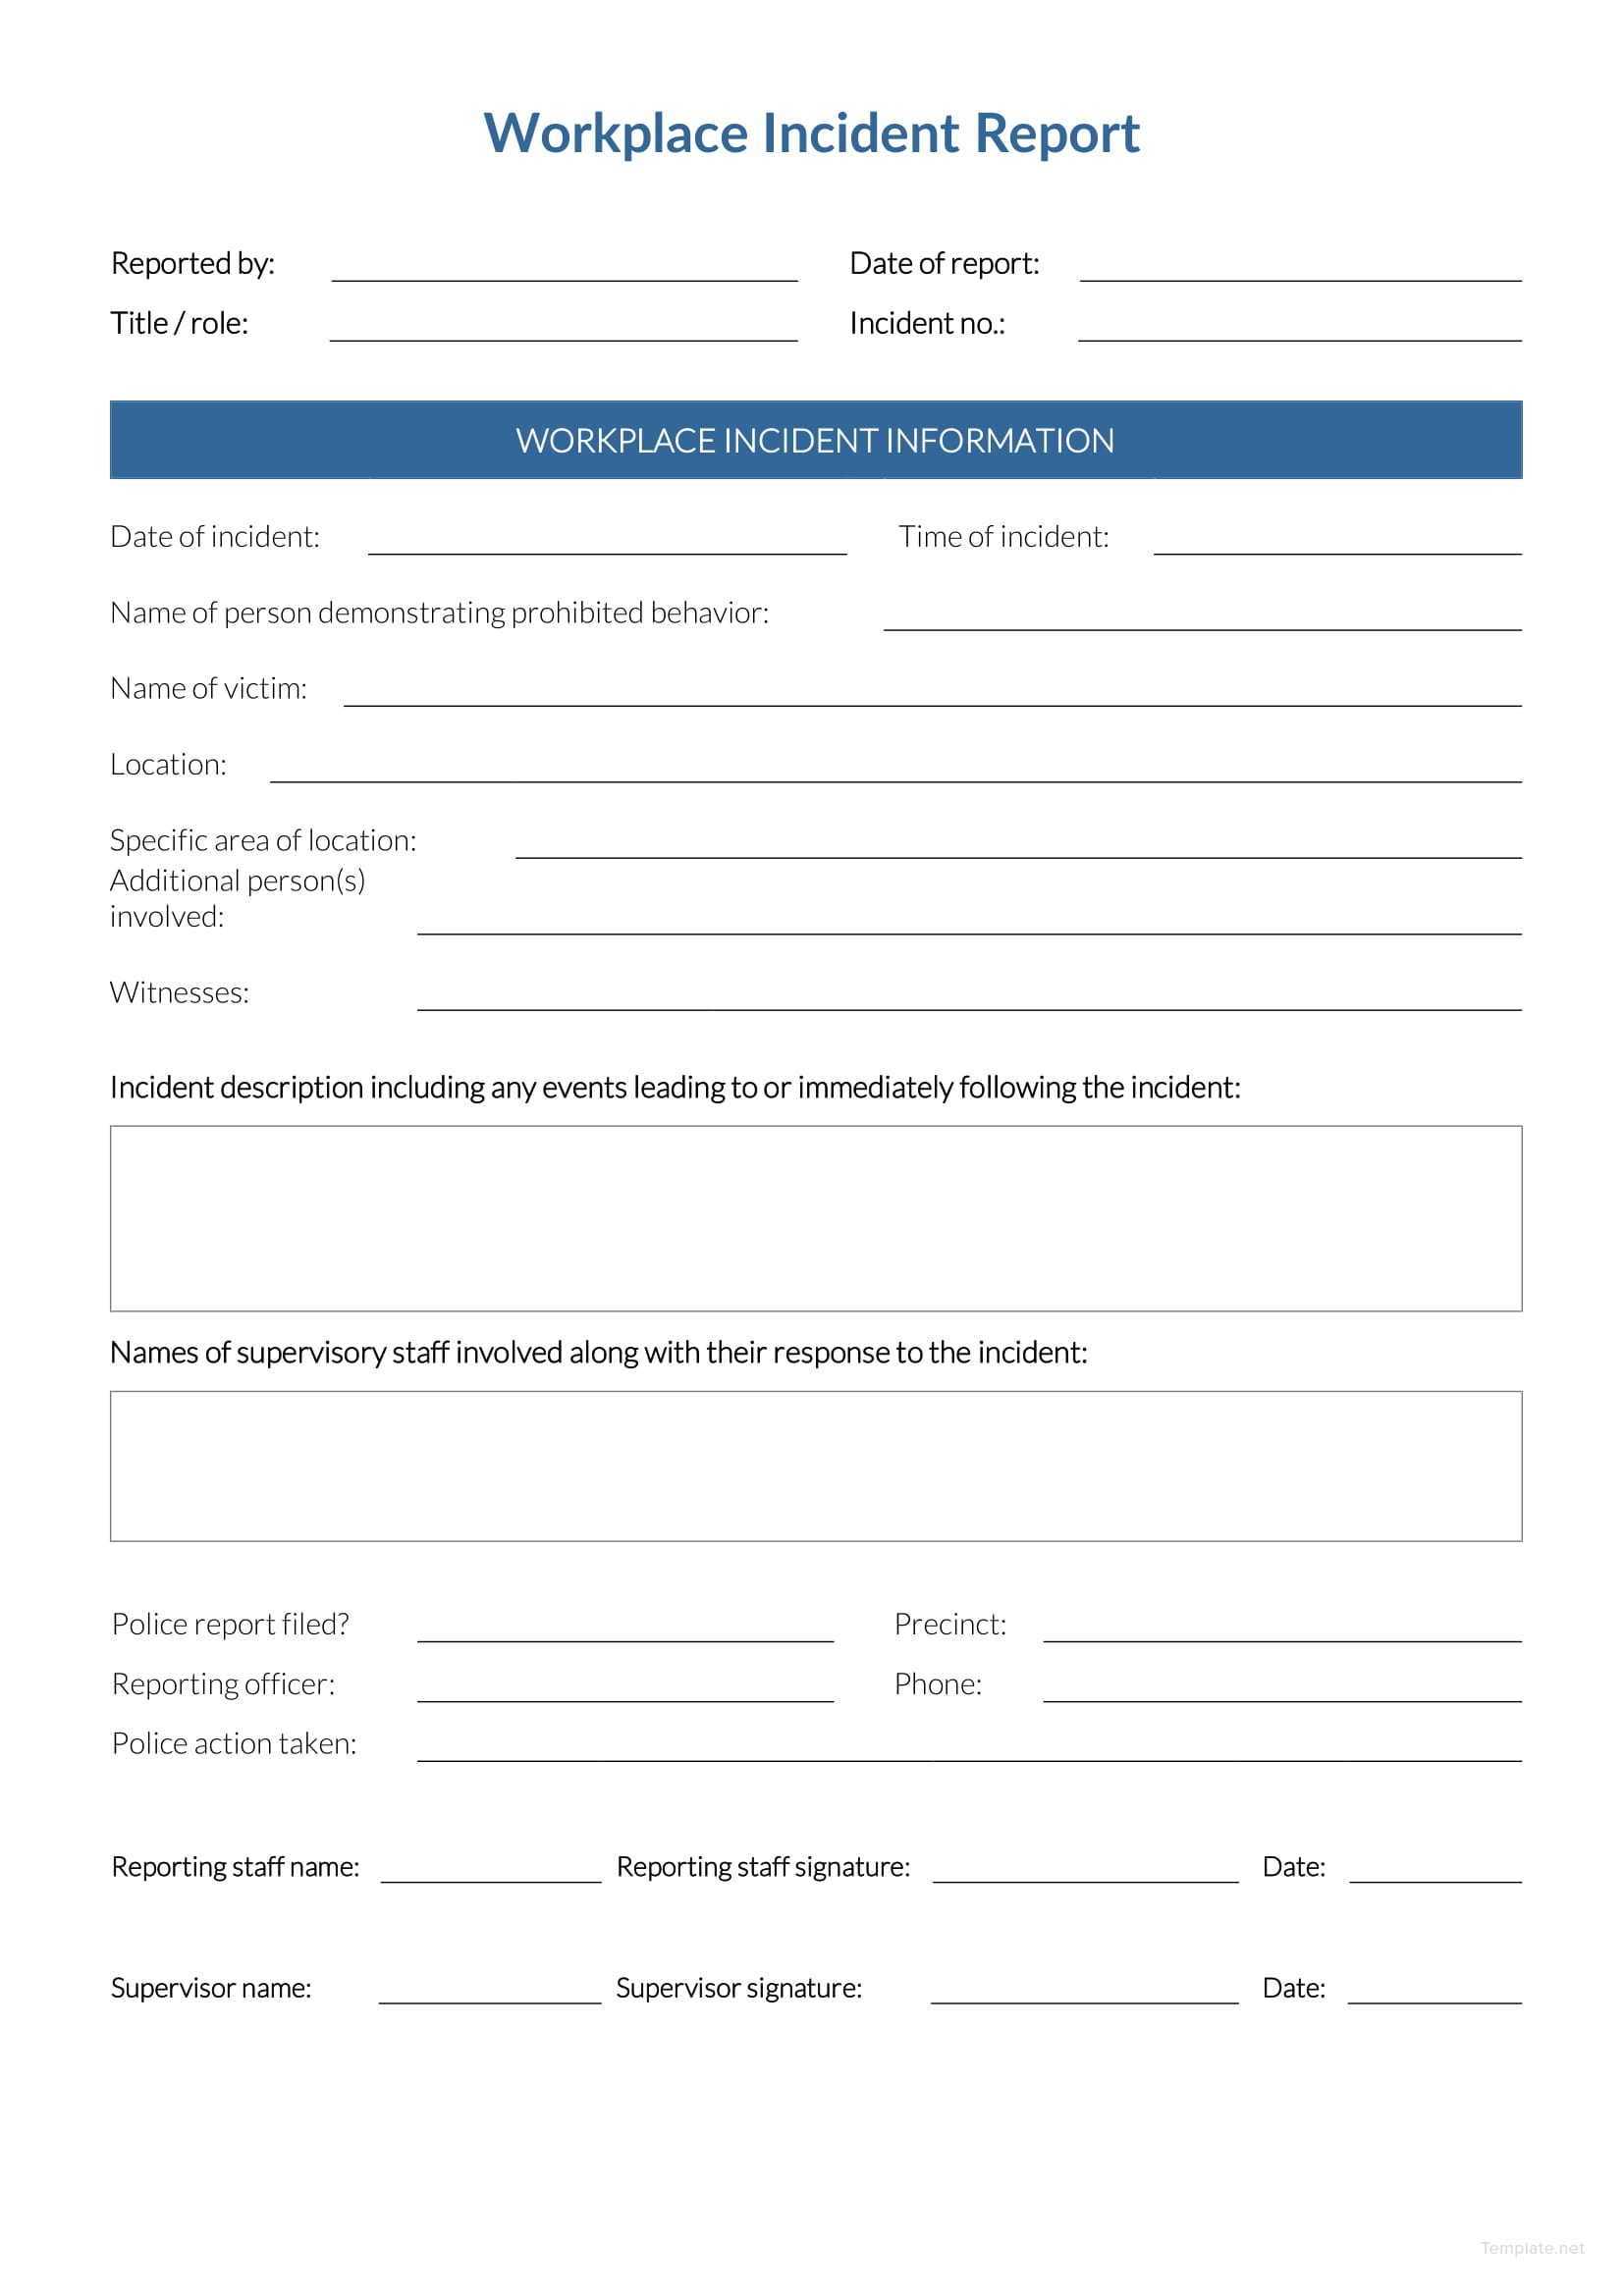 Free Workplace Incident Report | Data Form | Incident Report Inside Itil Incident Report Form Template